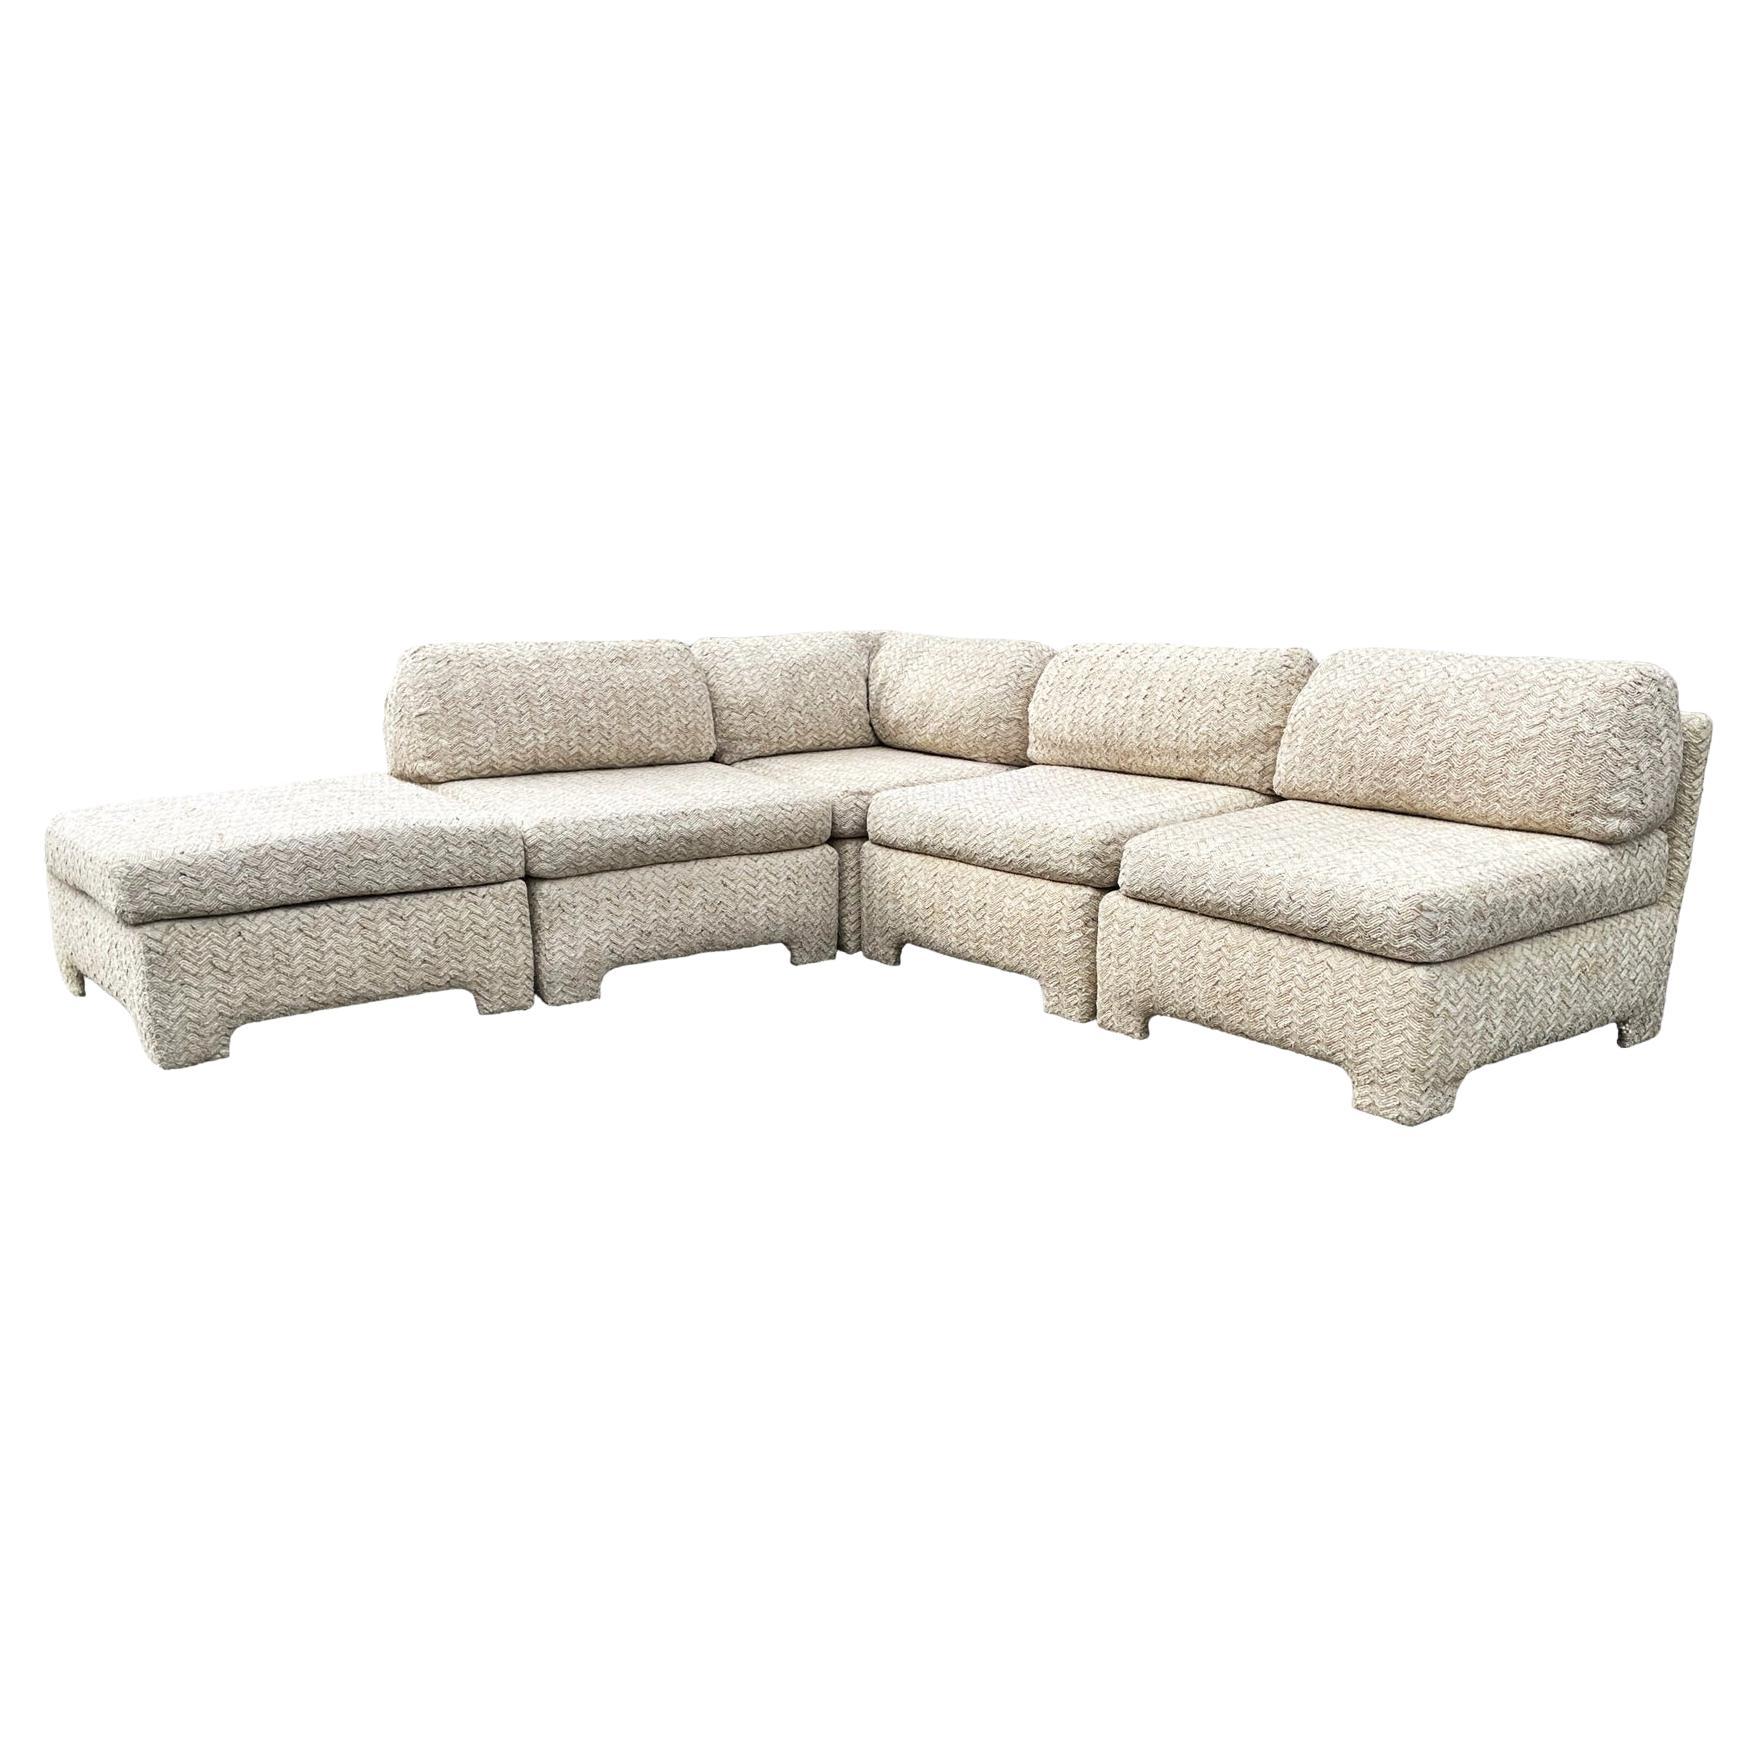 Mid Century Modern Boxy Modular Parsons Style L Shaped Sofa with Chaise Lounge